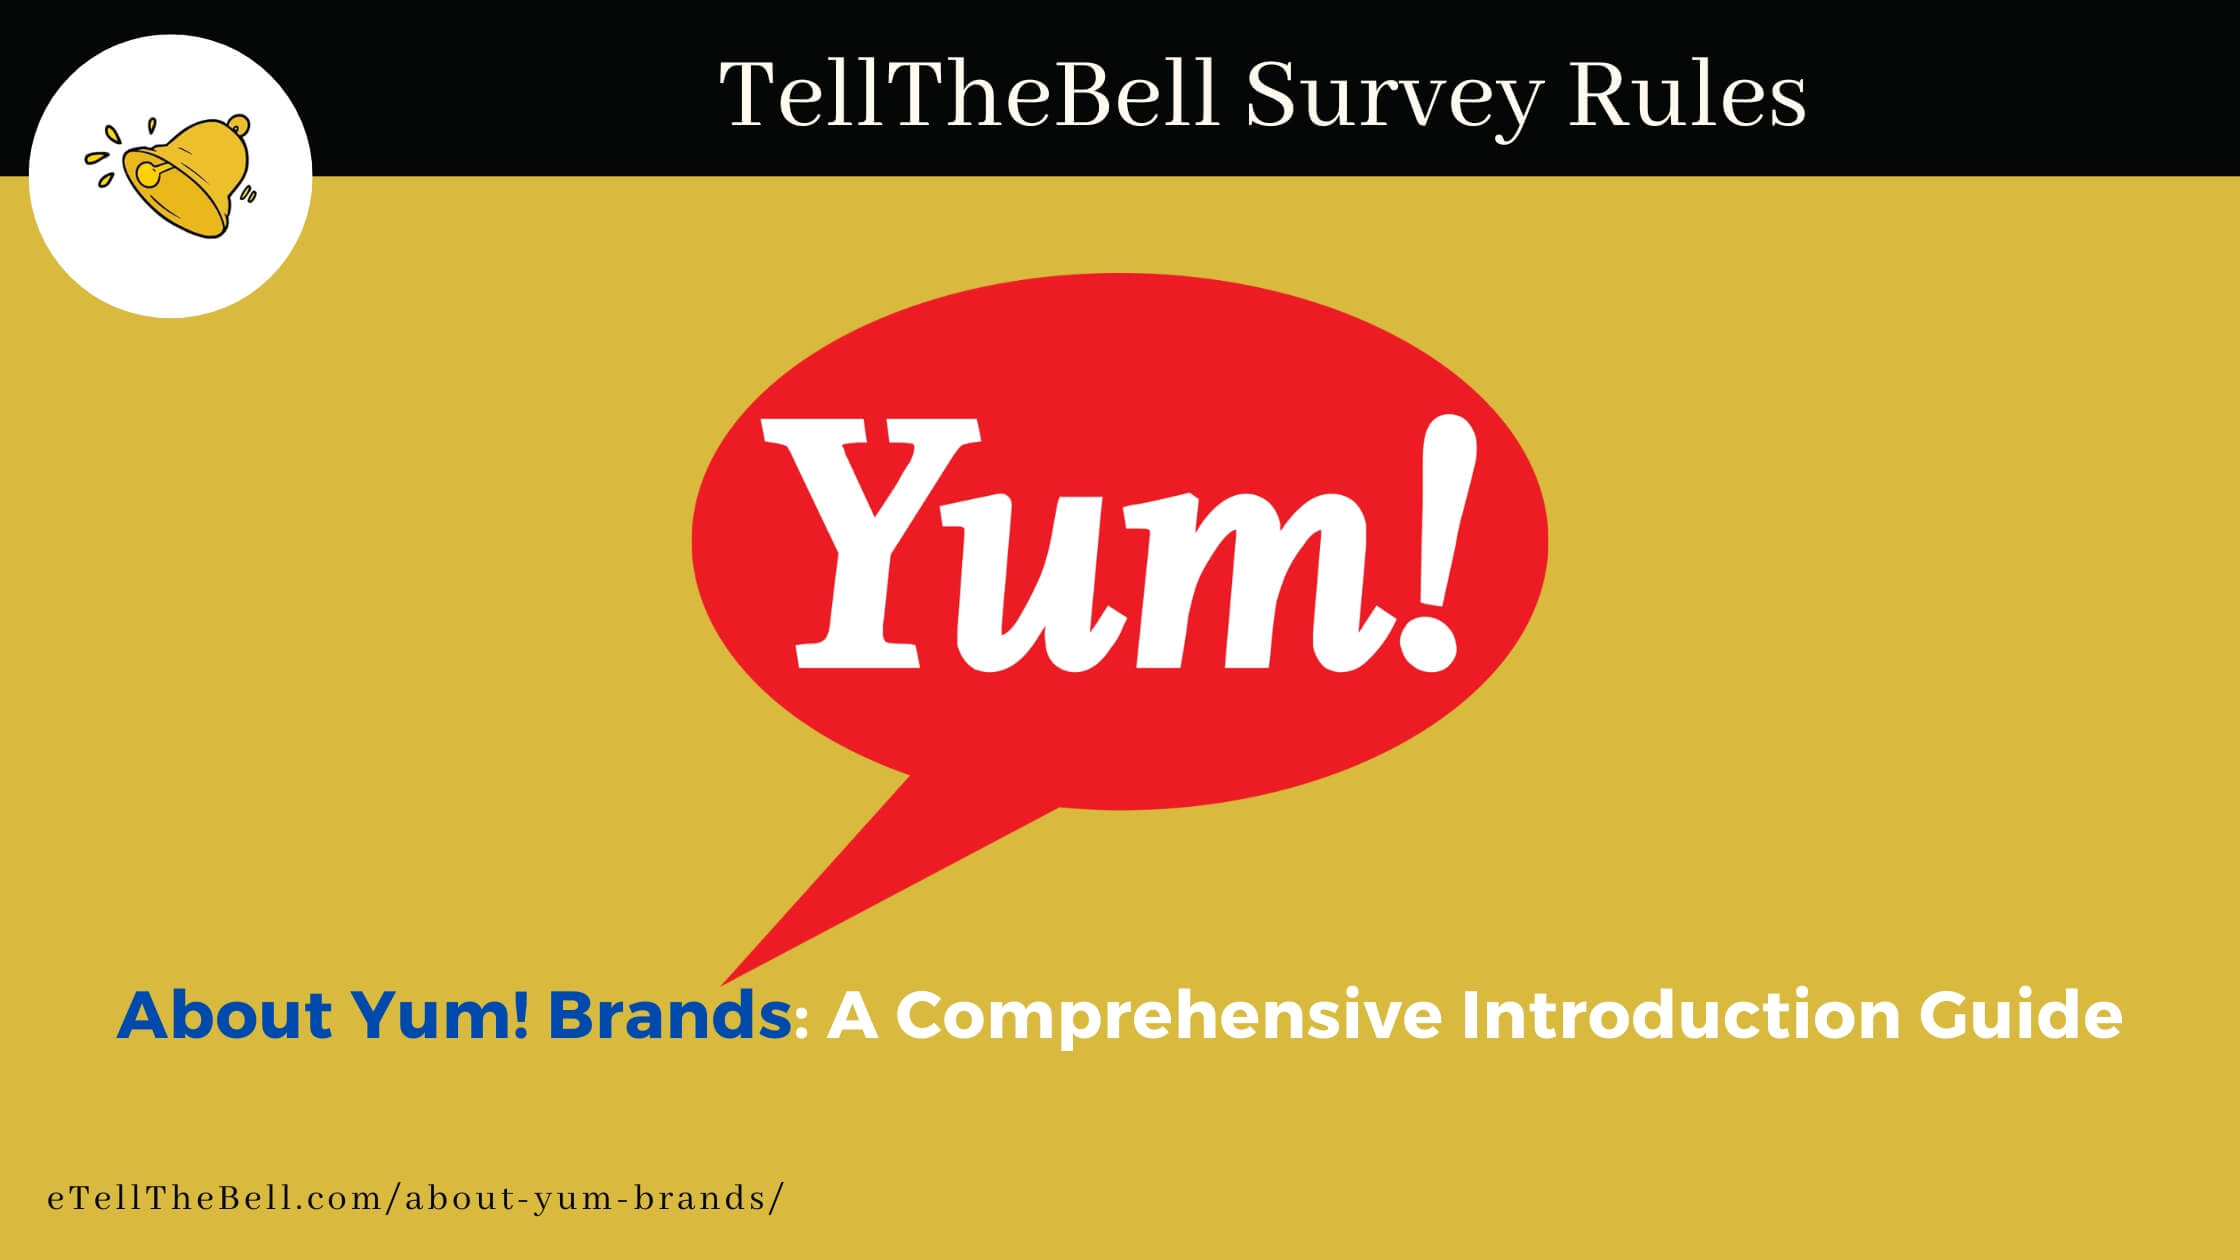 About Yum! Brands: A Comprehensive Introduction Guide